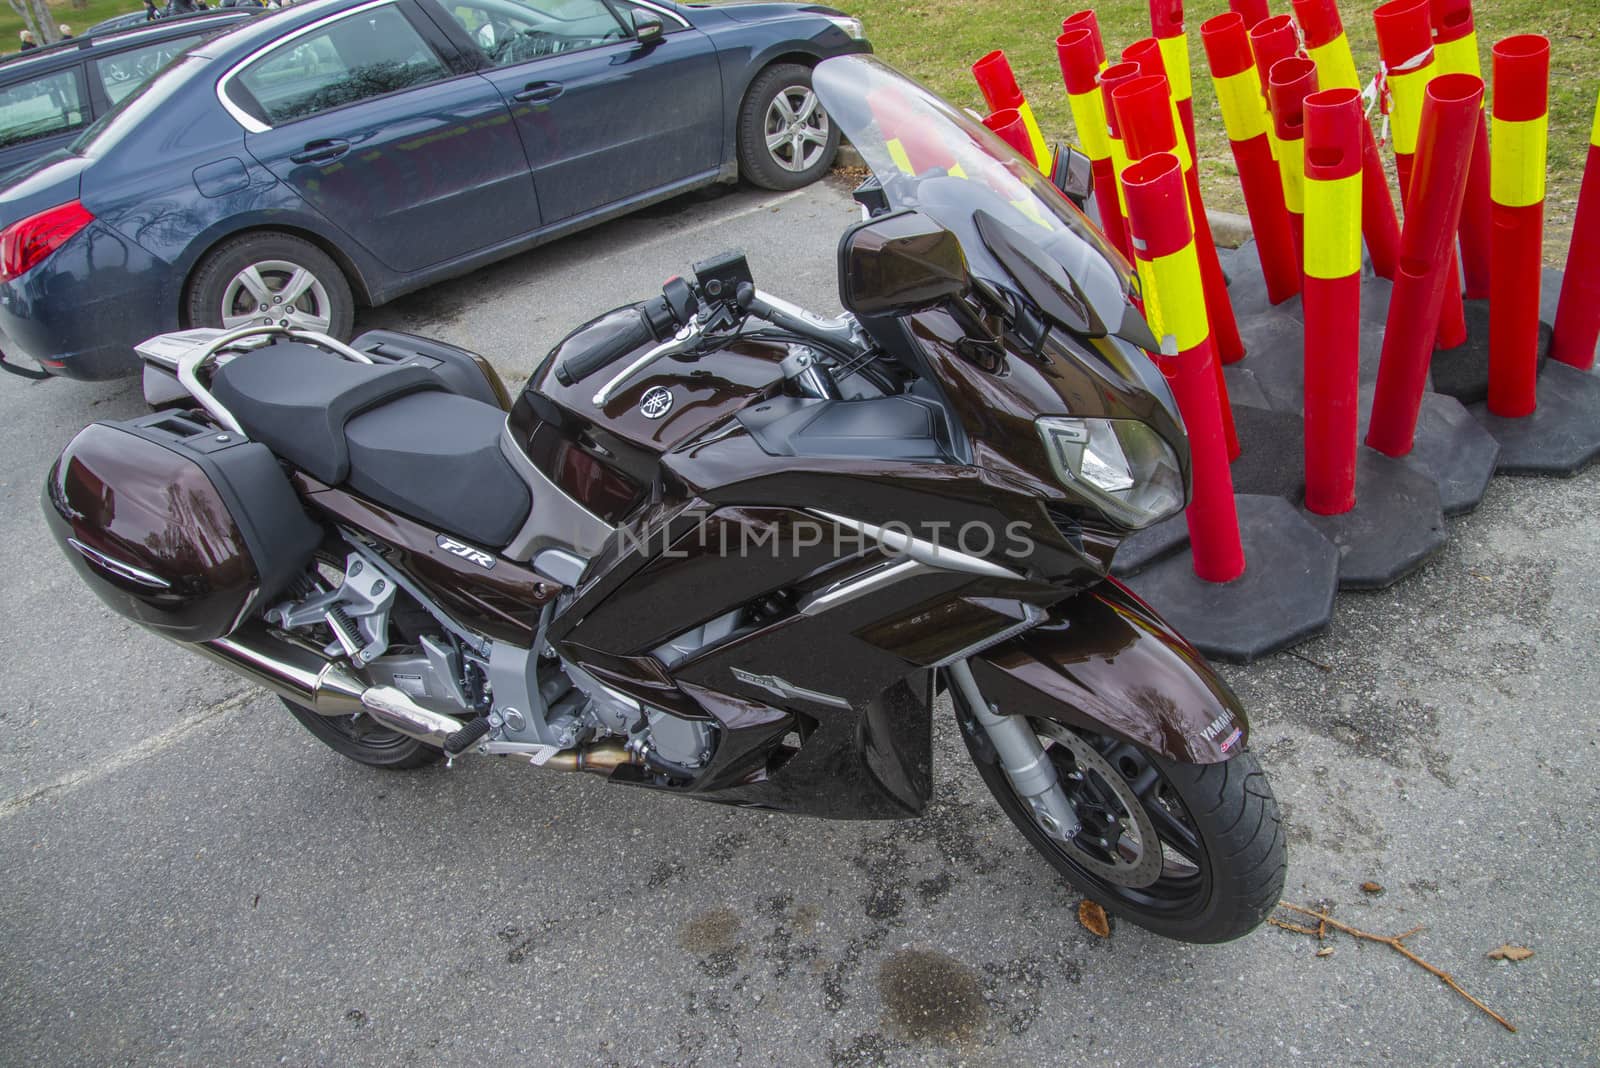 Every year in May there is a motorcycle meeting at Fredriksten fortress in Halden, Norway. In this photo Yamaha FJR1300 which is a sport touring motorcycles. 